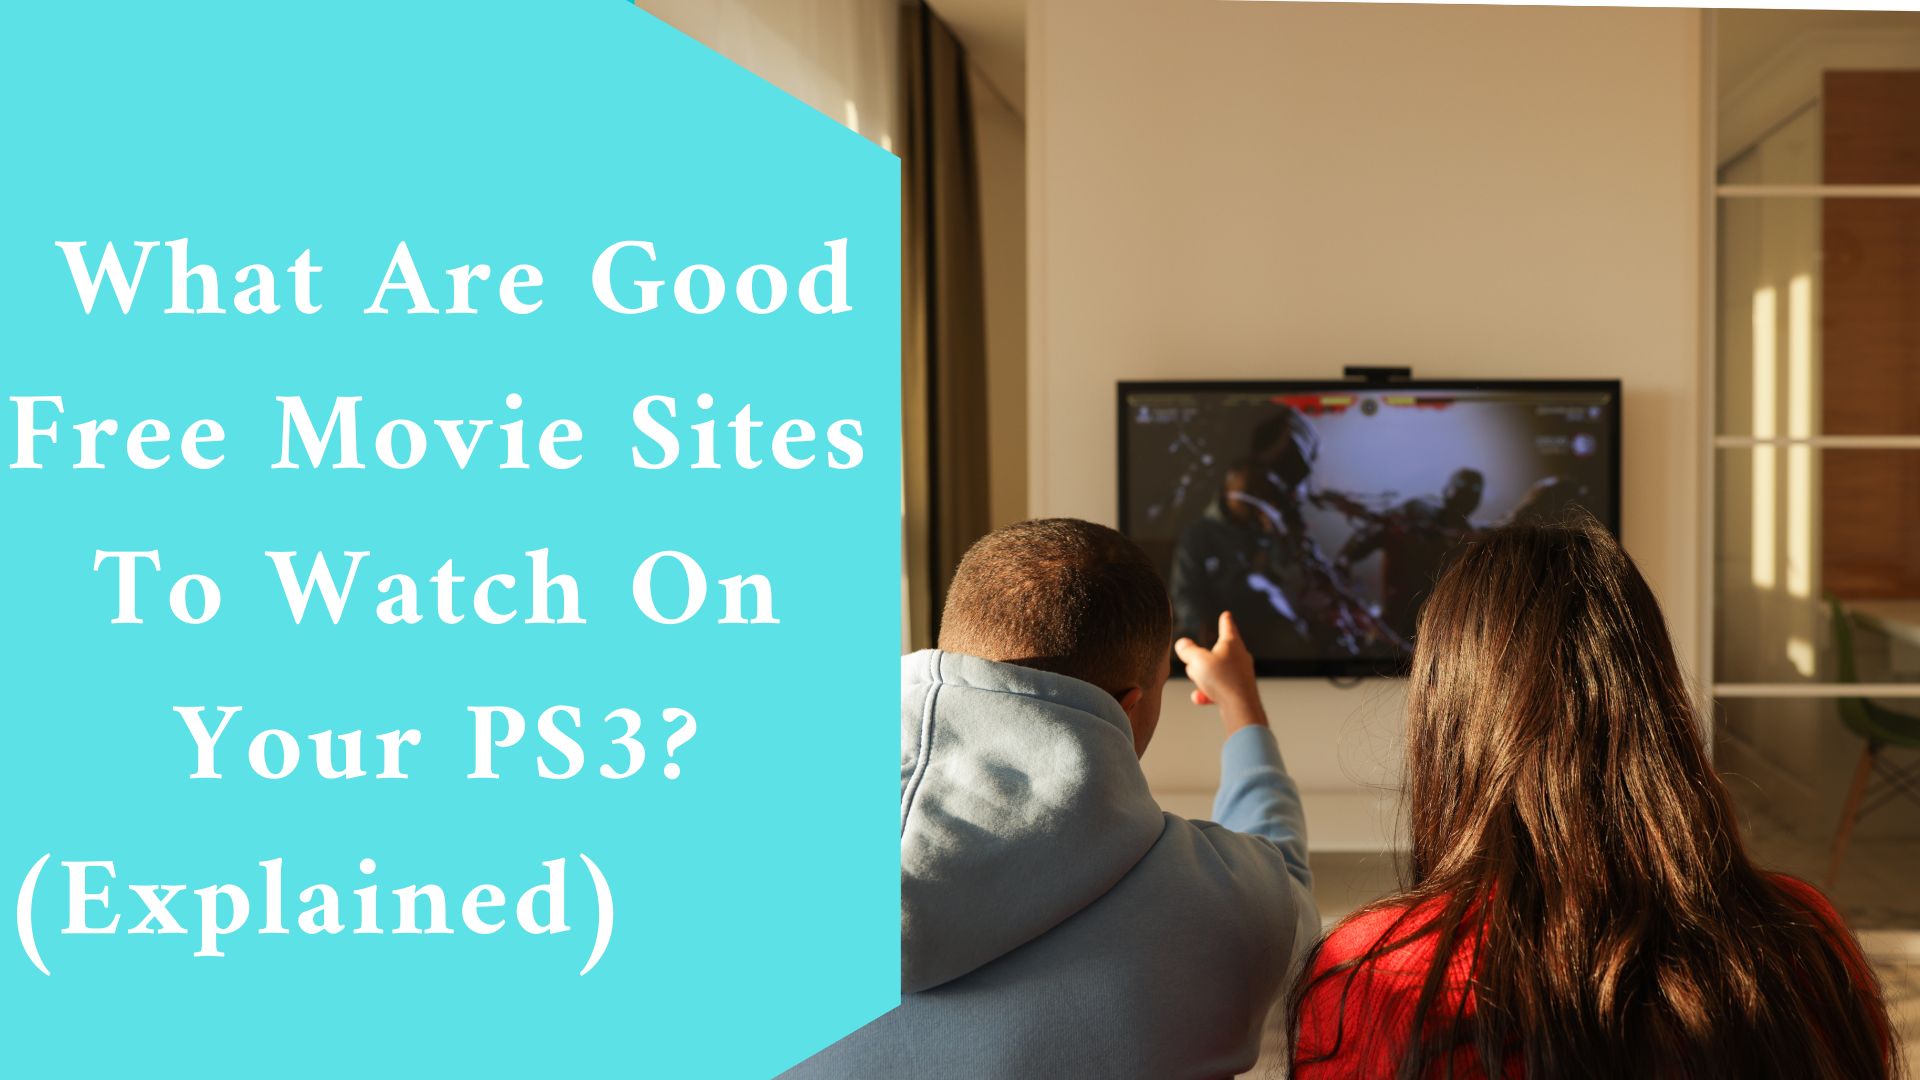 What Are Good Free Movie Sites To Watch On Your PS3? (Explained)